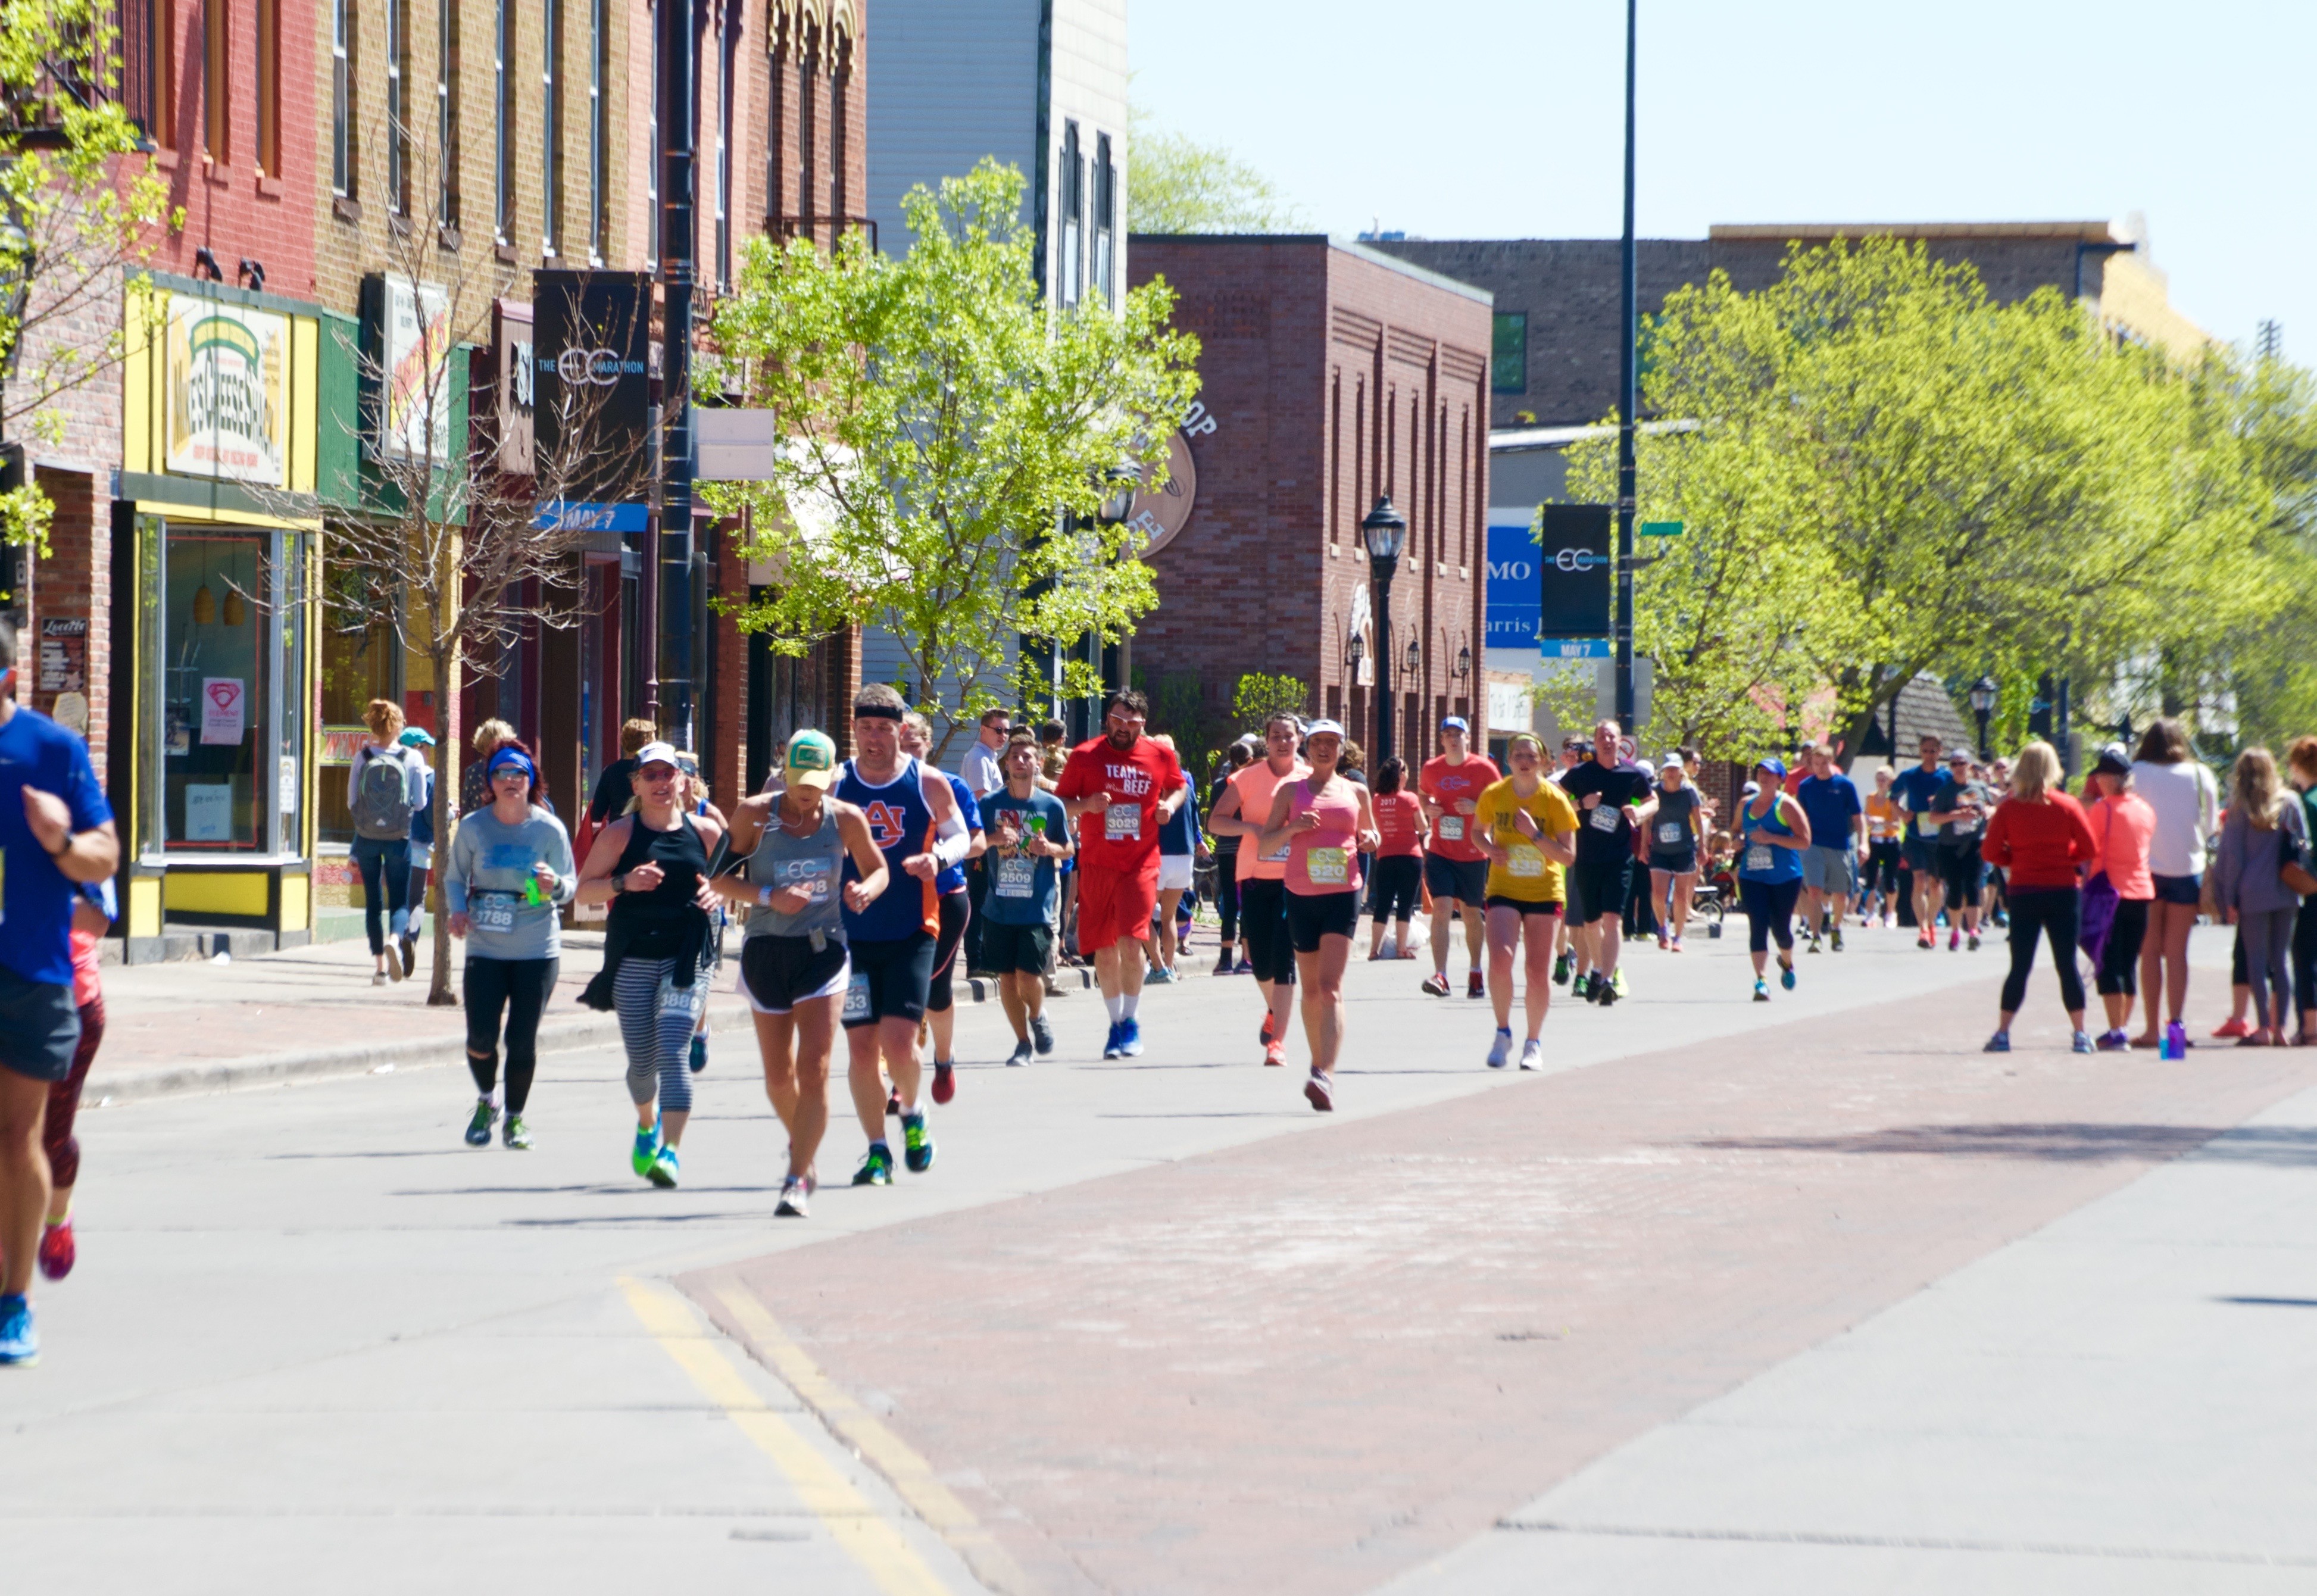 The 2020 Eau Claire Marathon will be run completely virtual due to